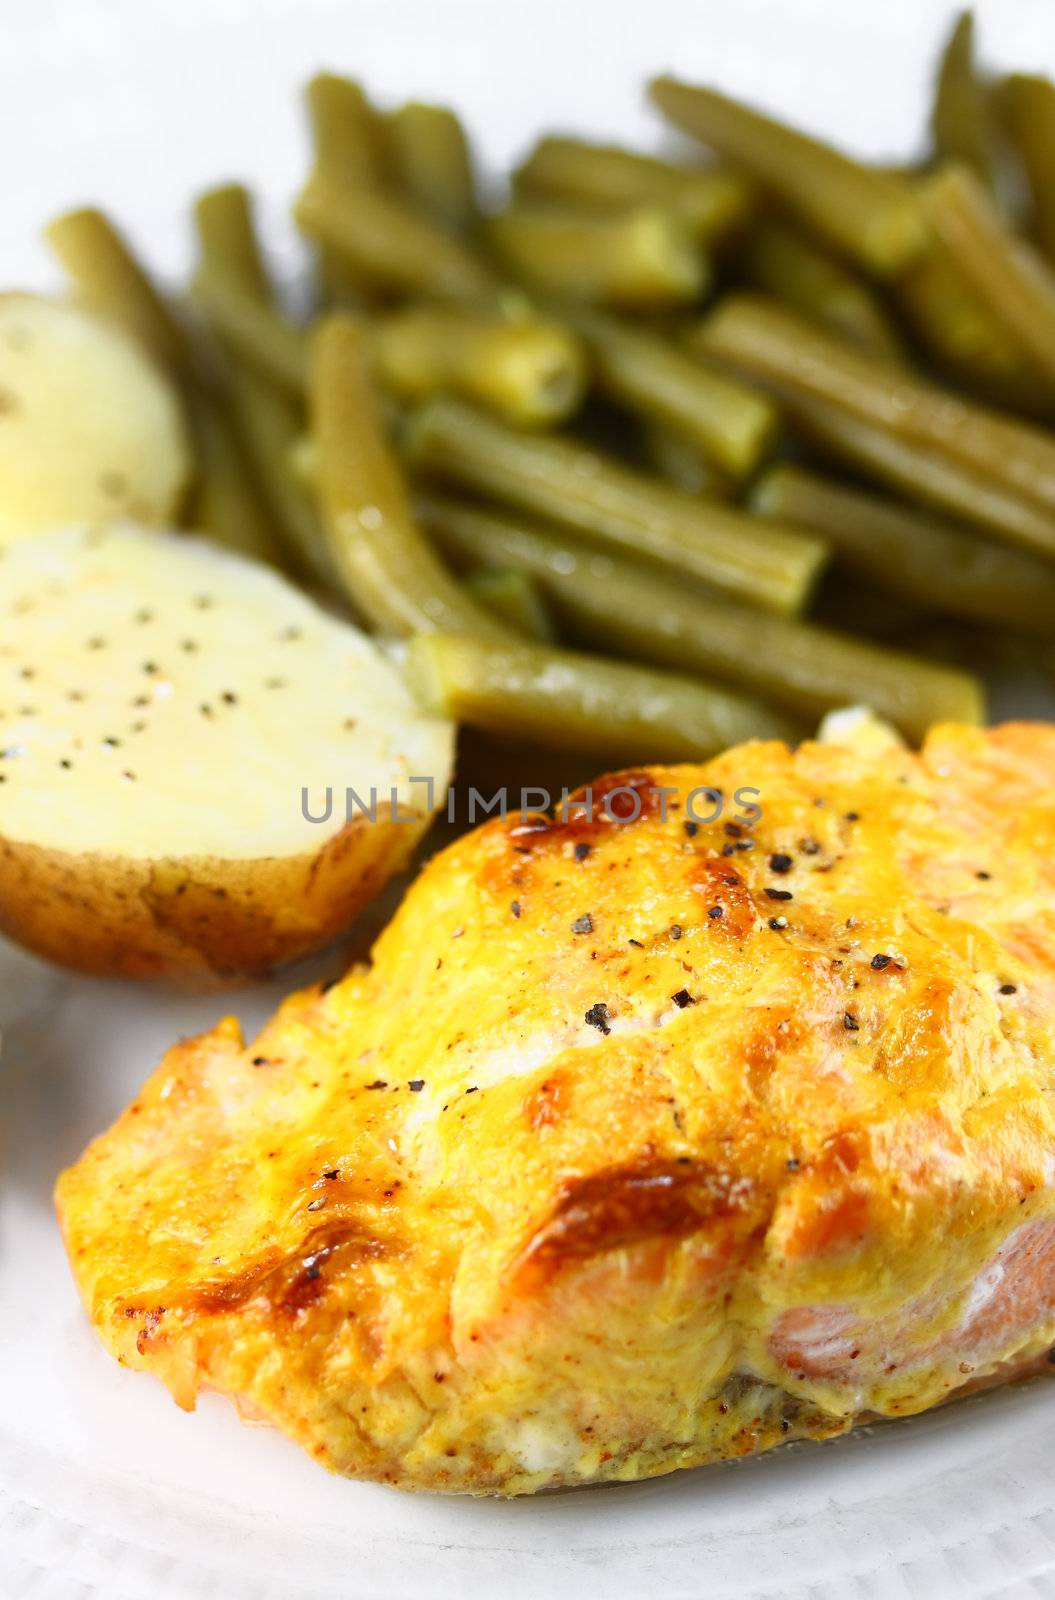 Baked Salmon (vertical) by Geoarts